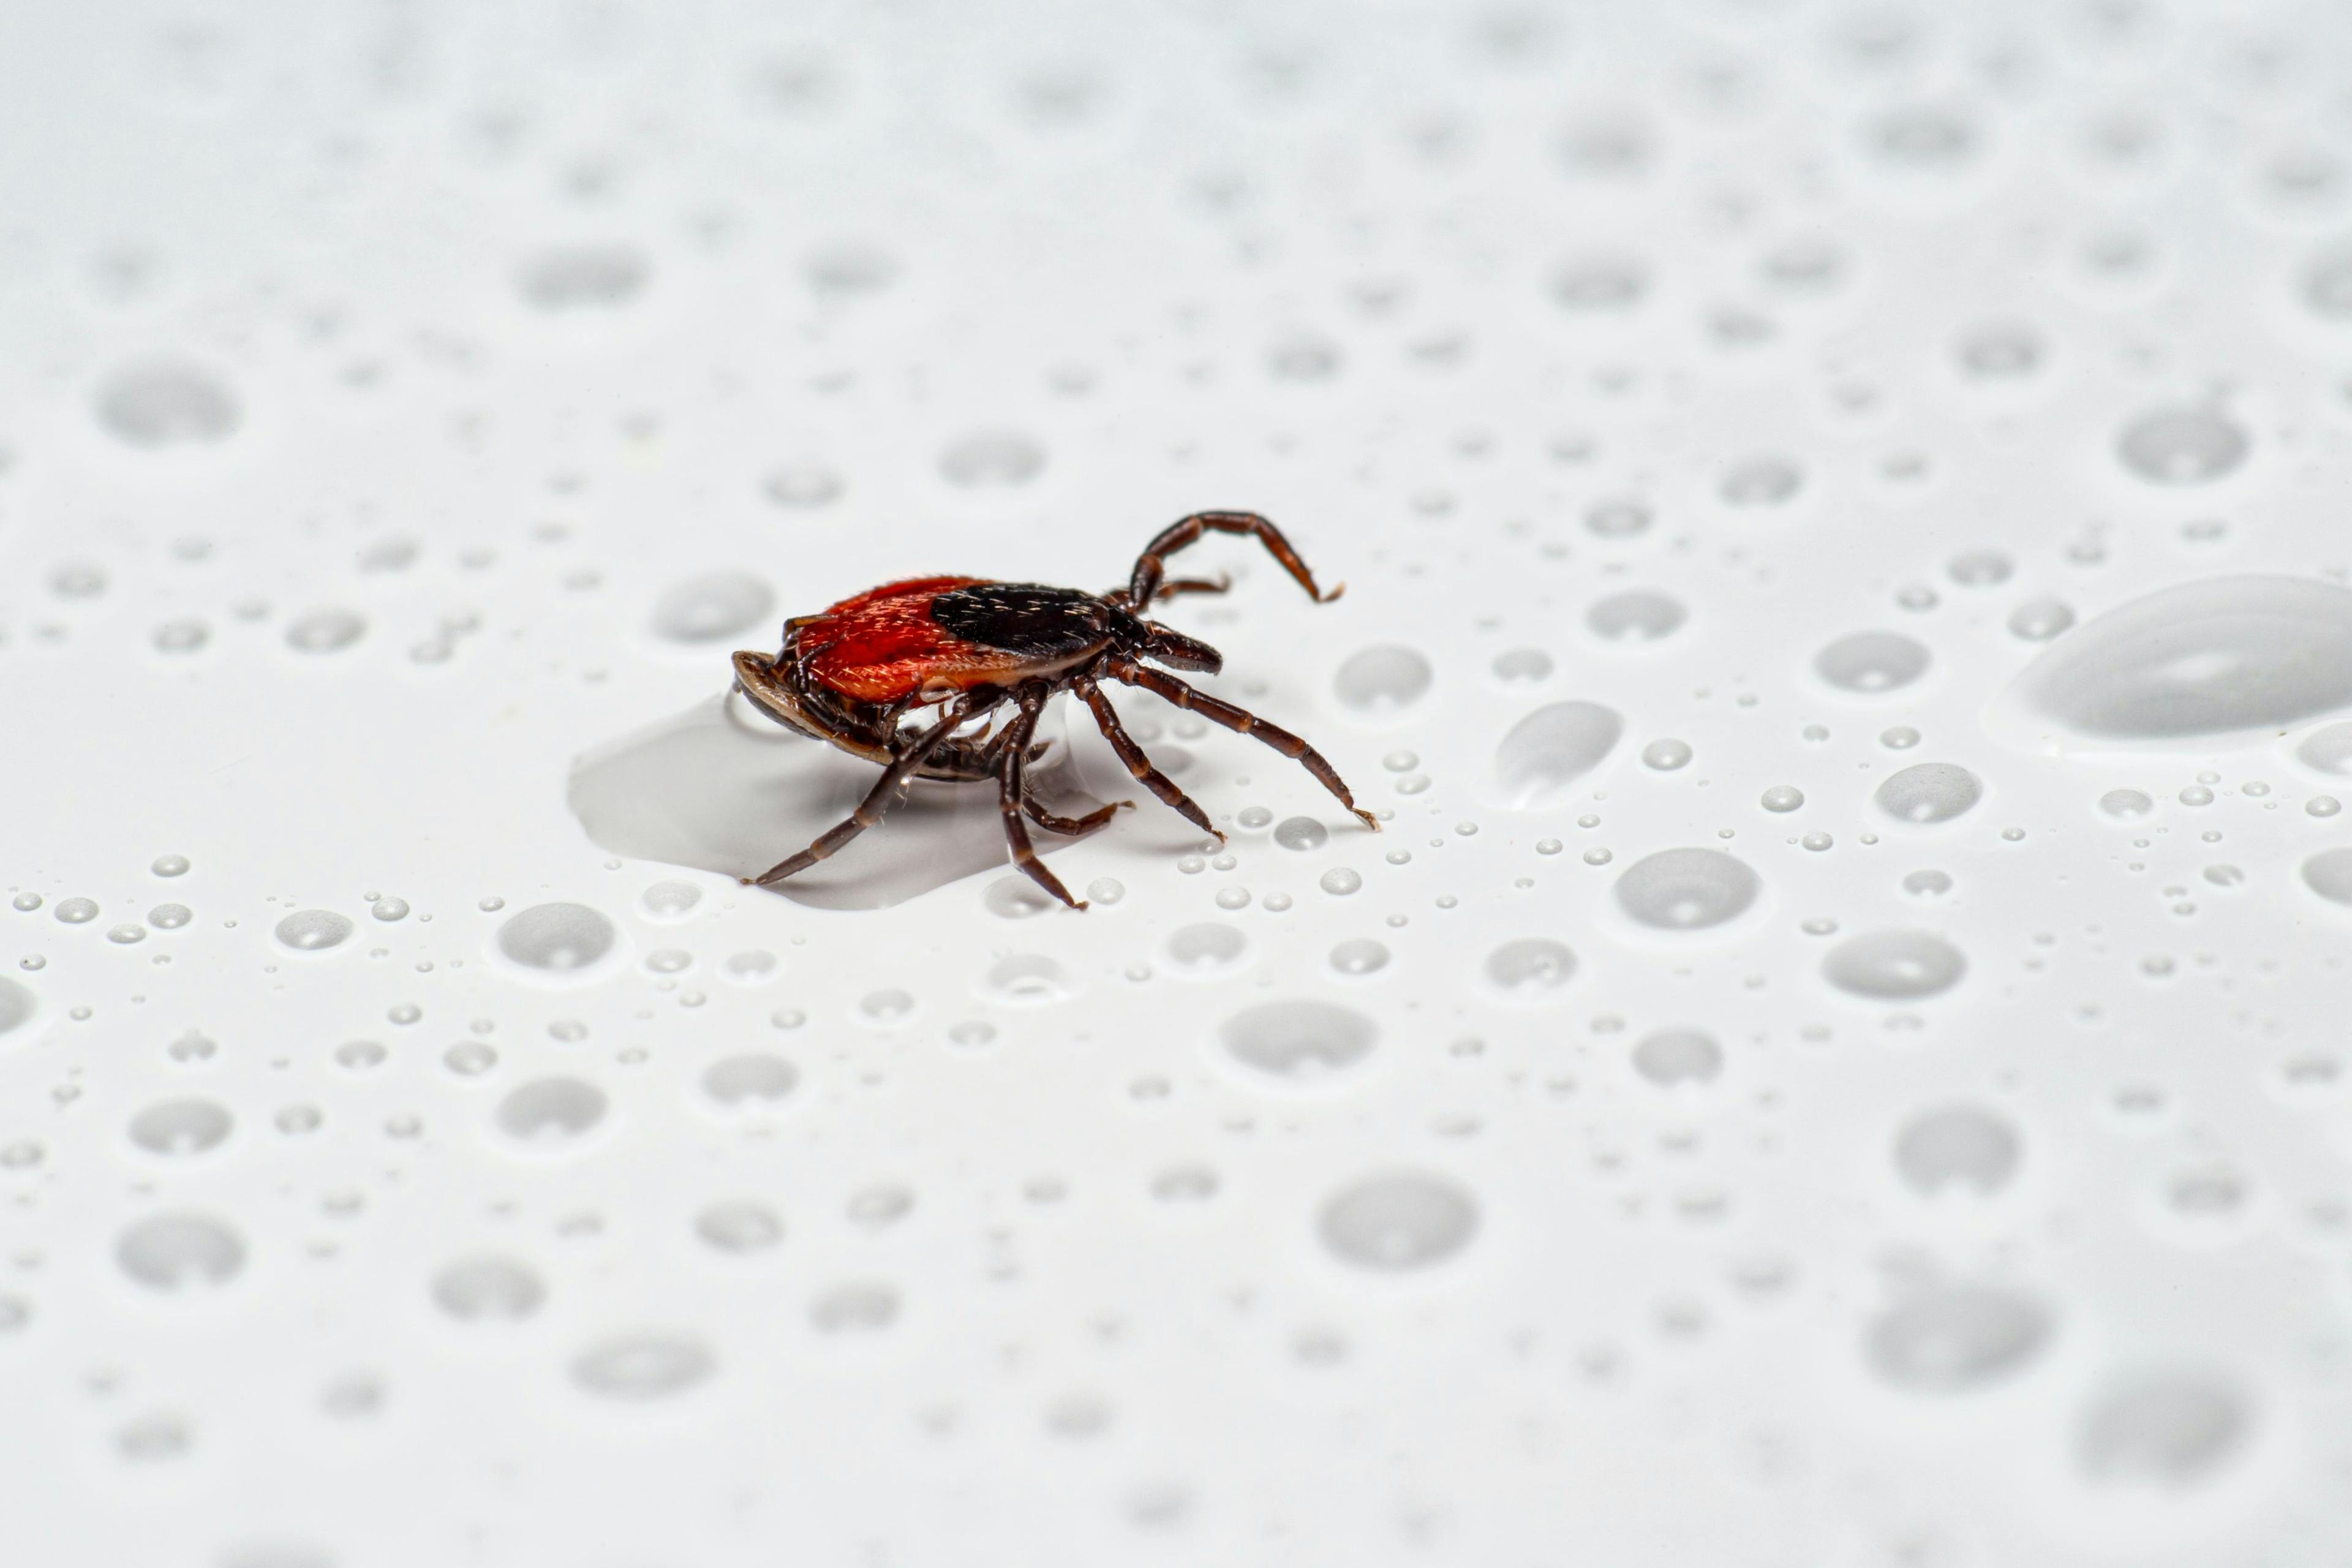 Immunosequencing T-Cell Receptor Repertoires Helps Diagnose Lyme Disease